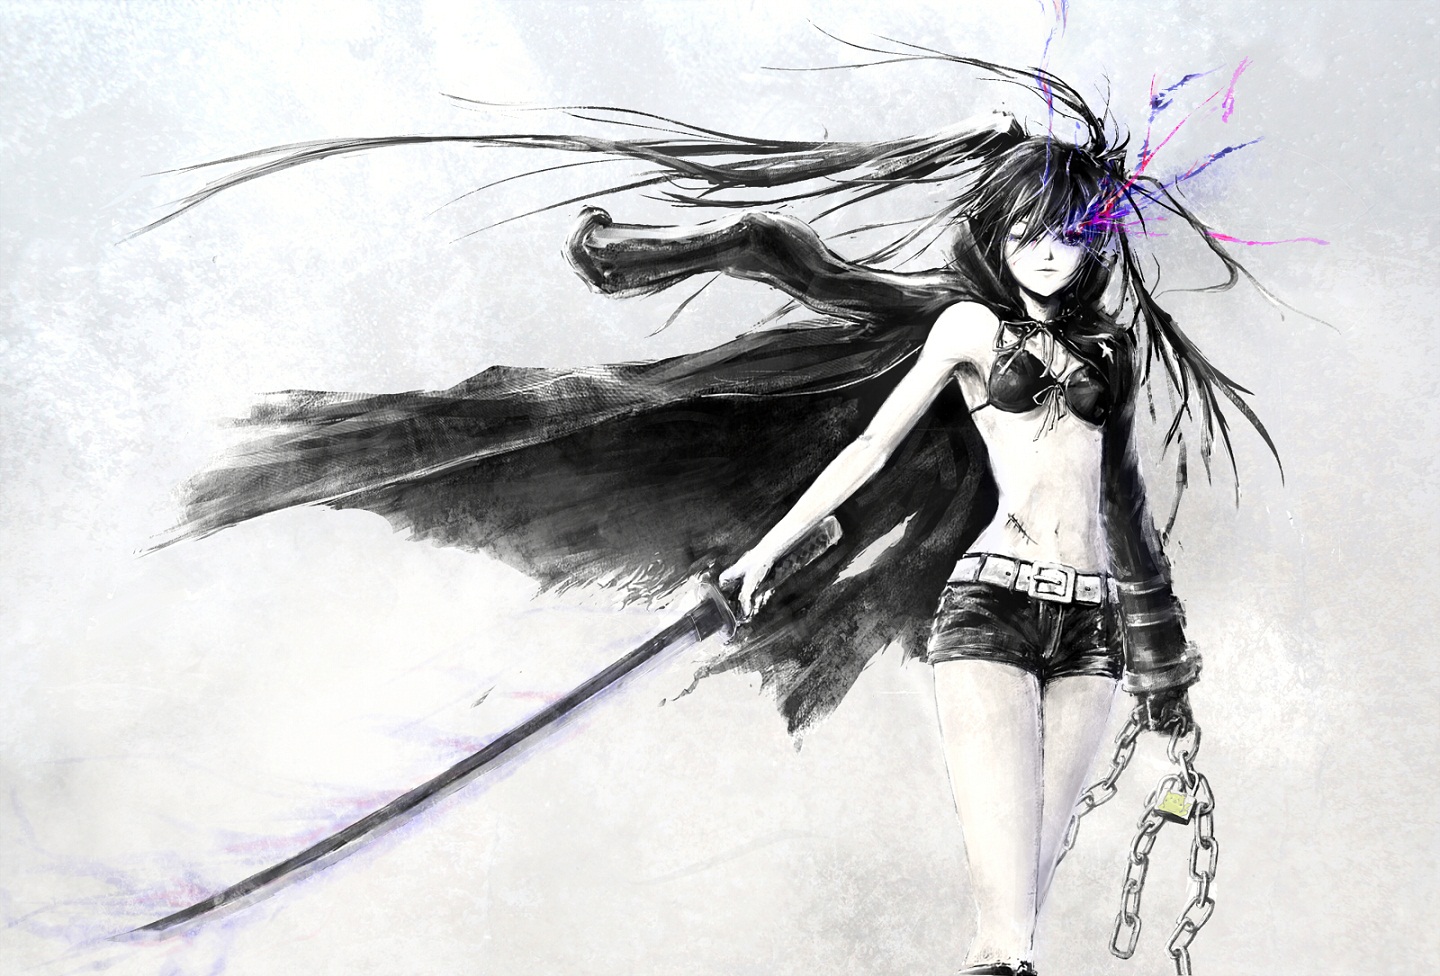 1481 Black Rock Shooter HD Wallpapers | Backgrounds - Wallpaper Abyss